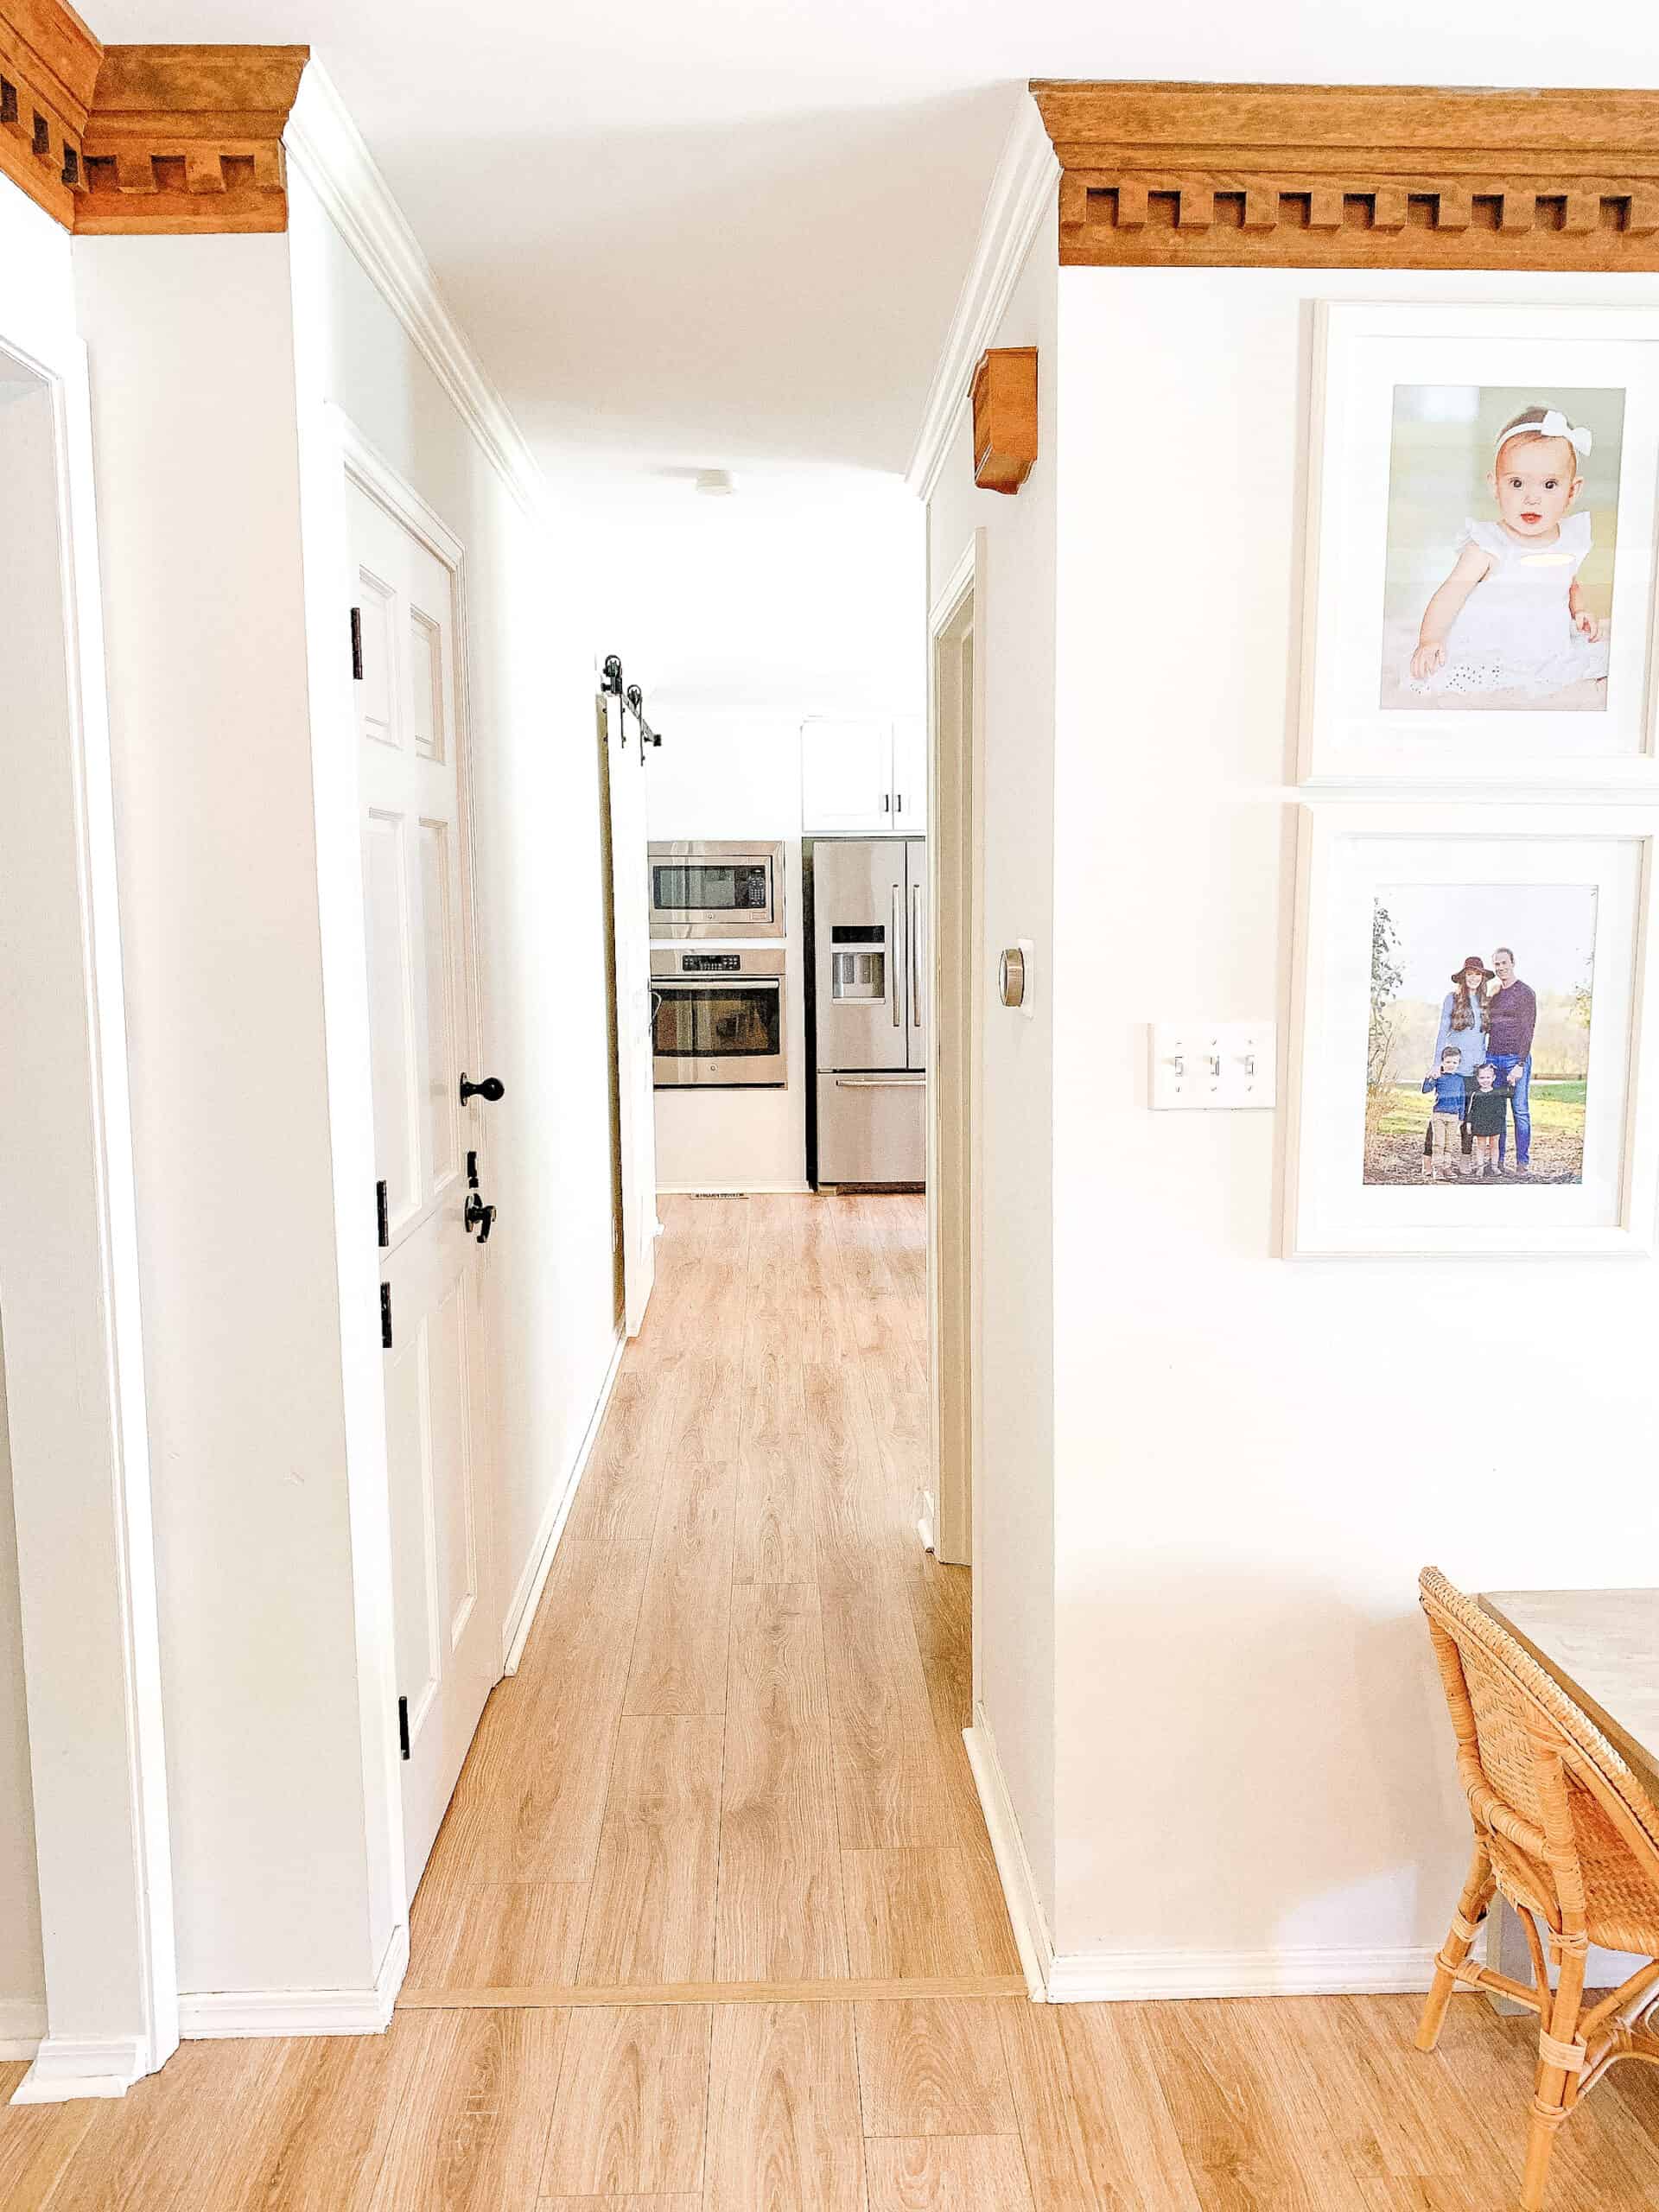 Pergo Flooring Review by a Mom of 4 - arinsolangeathome